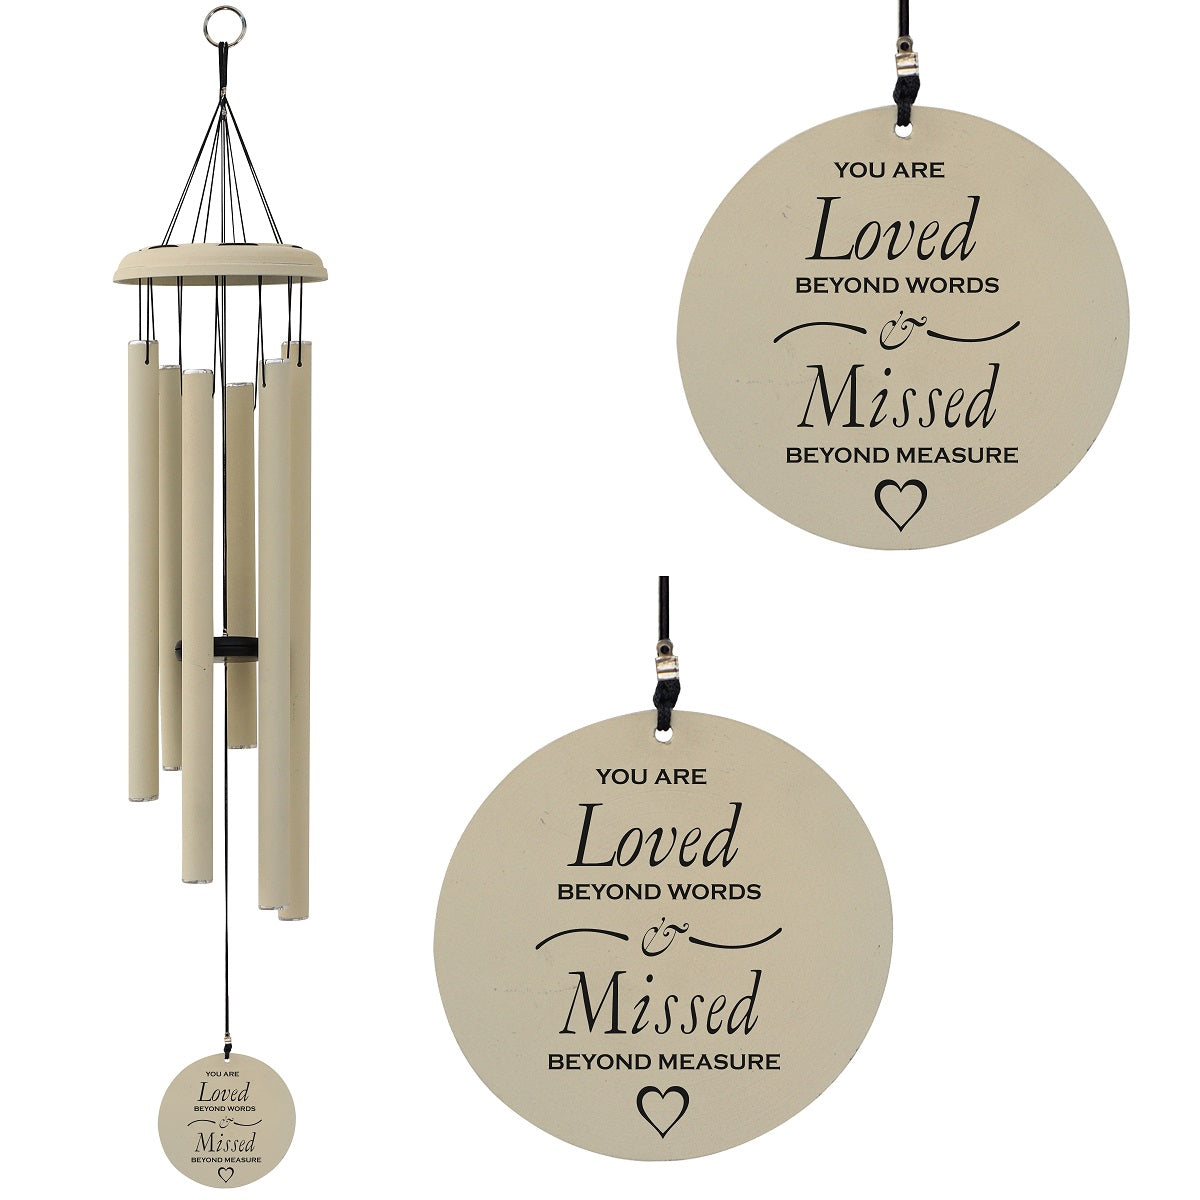 Memorial Wind Chime MWC115